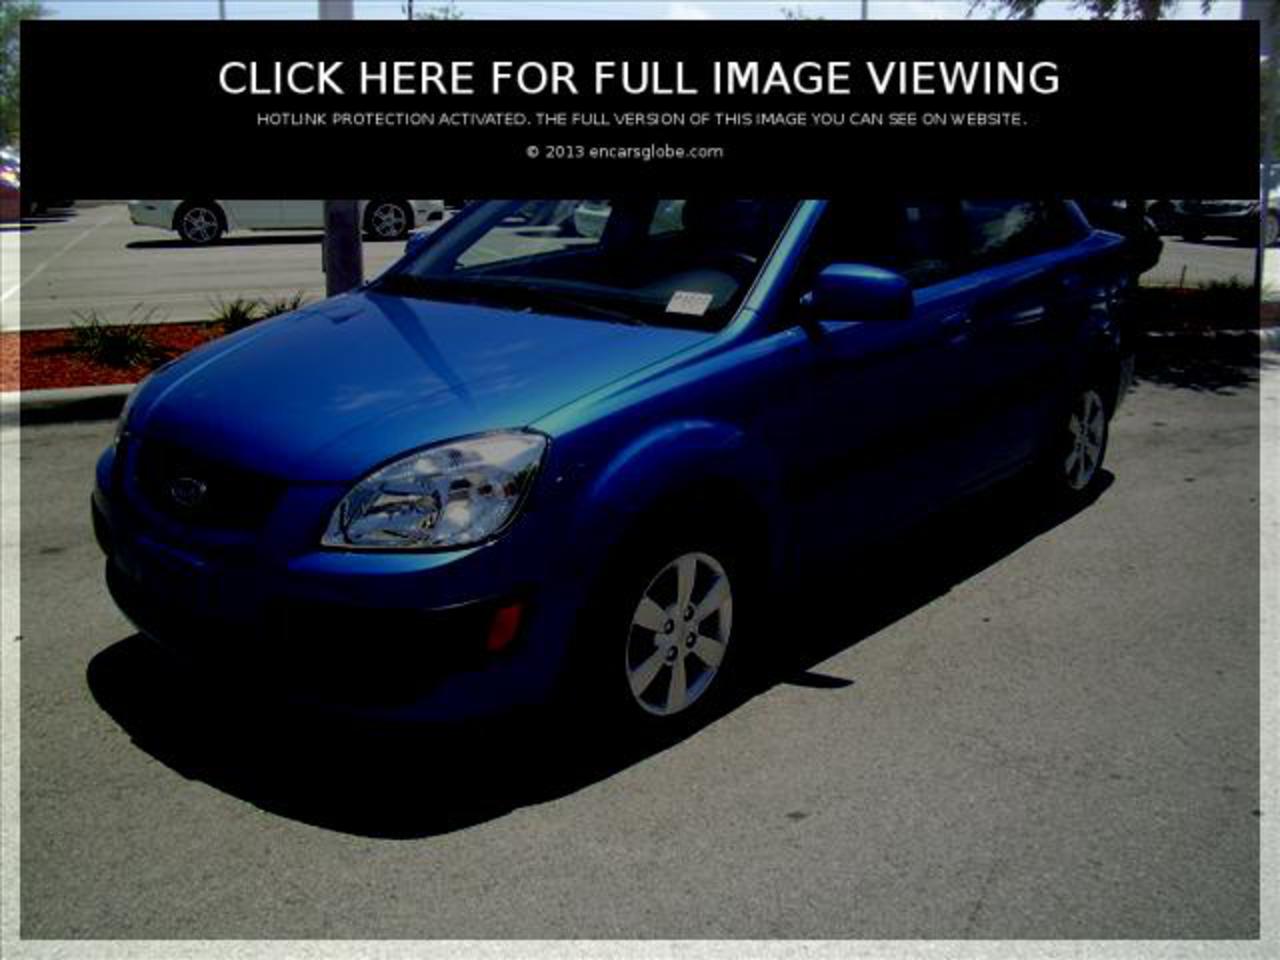 Kia Rio JB 14 LX: Photo gallery, complete information about model ...